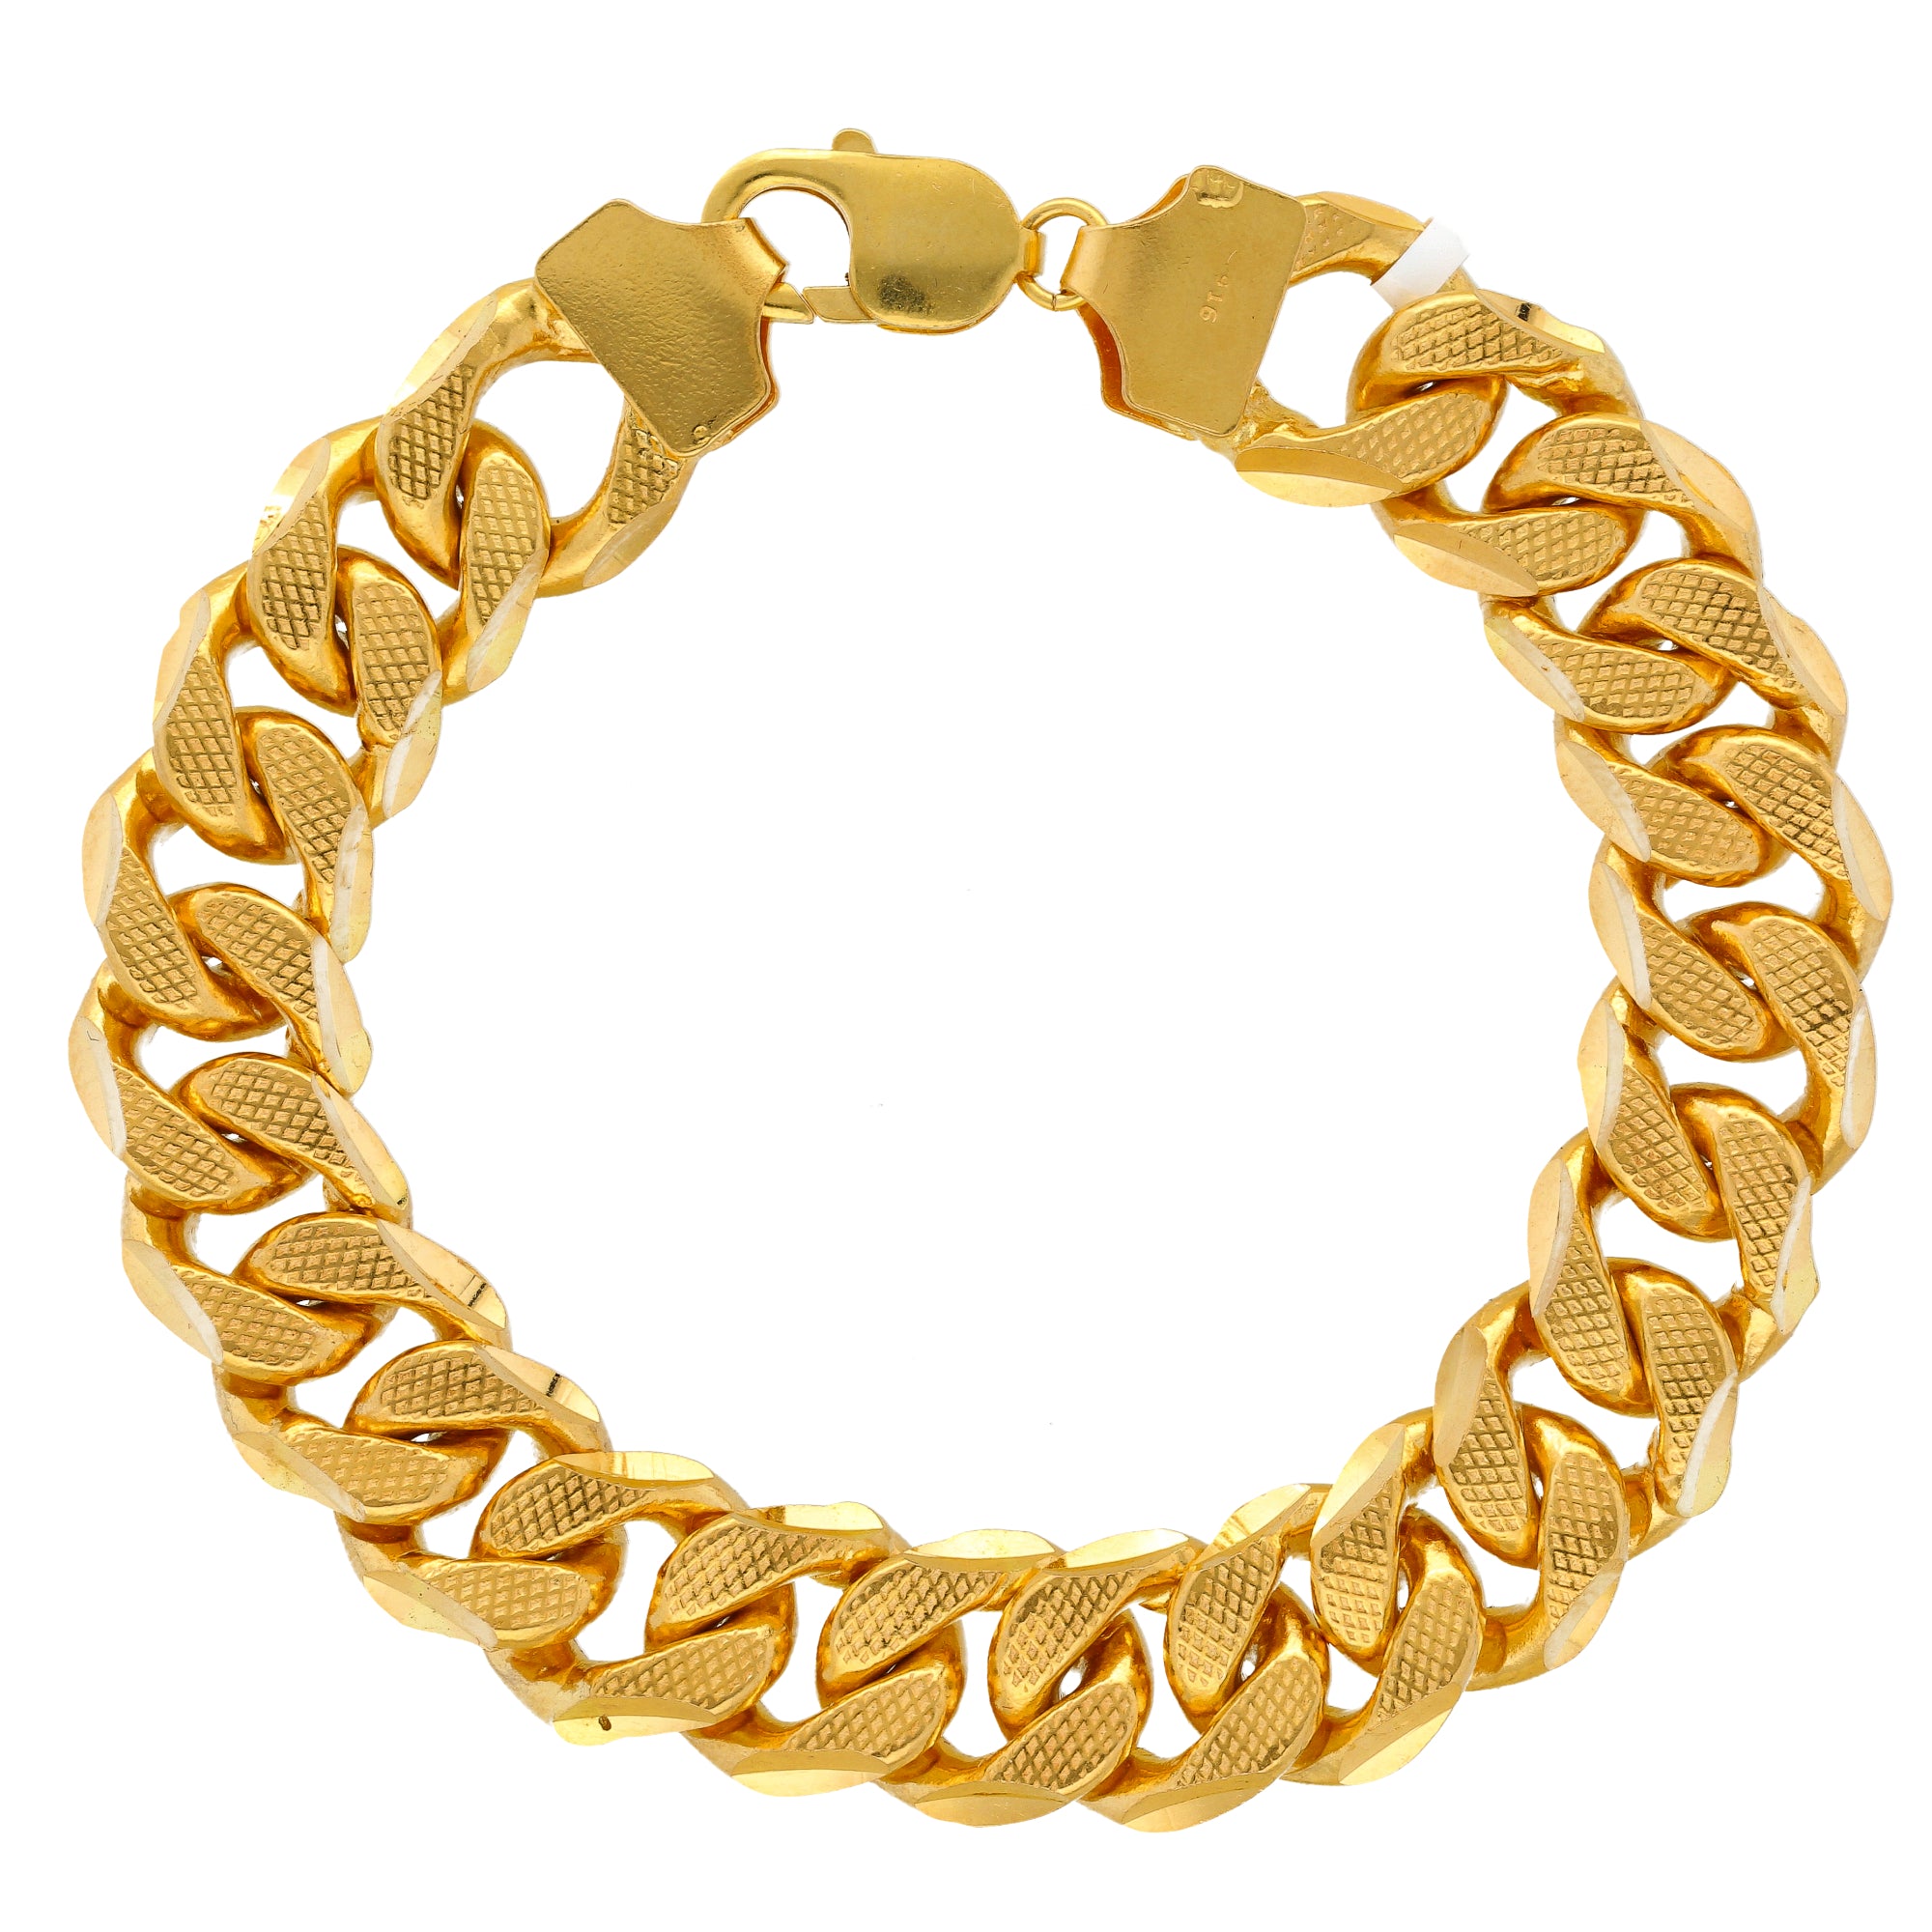 Buy Three Shades Heavy Mens Gold Plated Chain Bracelet Link Design Combo  for Men Boys (Set of 2) Online In India At Discounted Prices